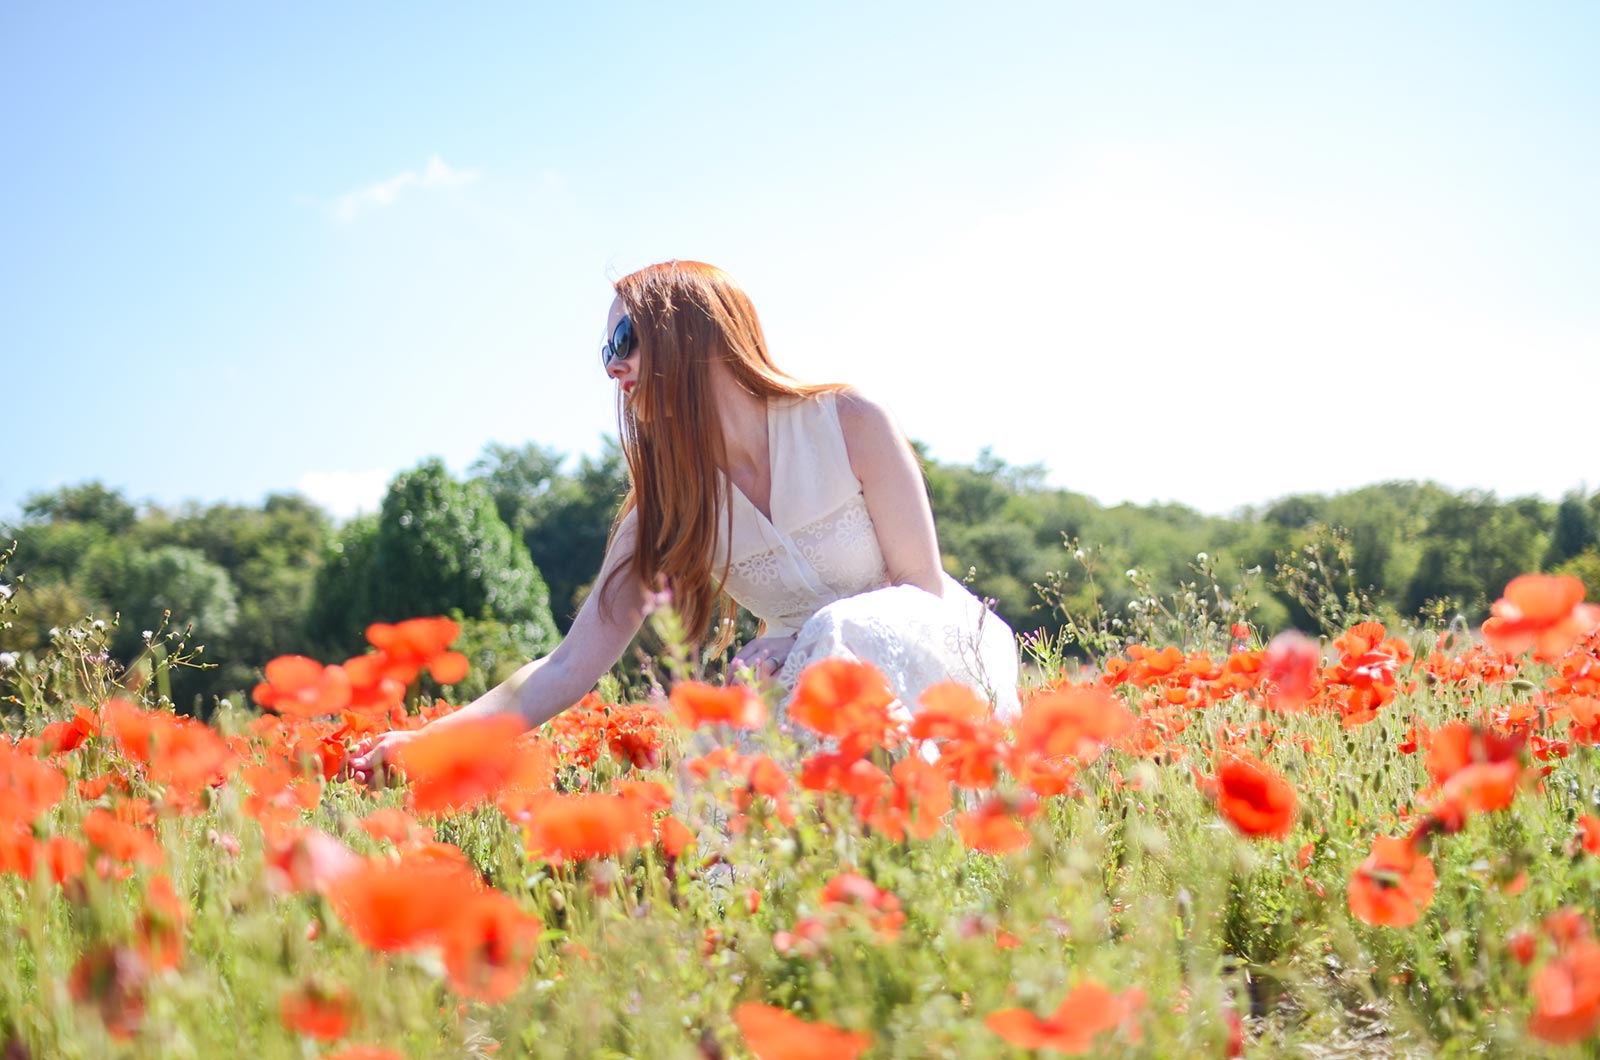 Amber in a field of poppies